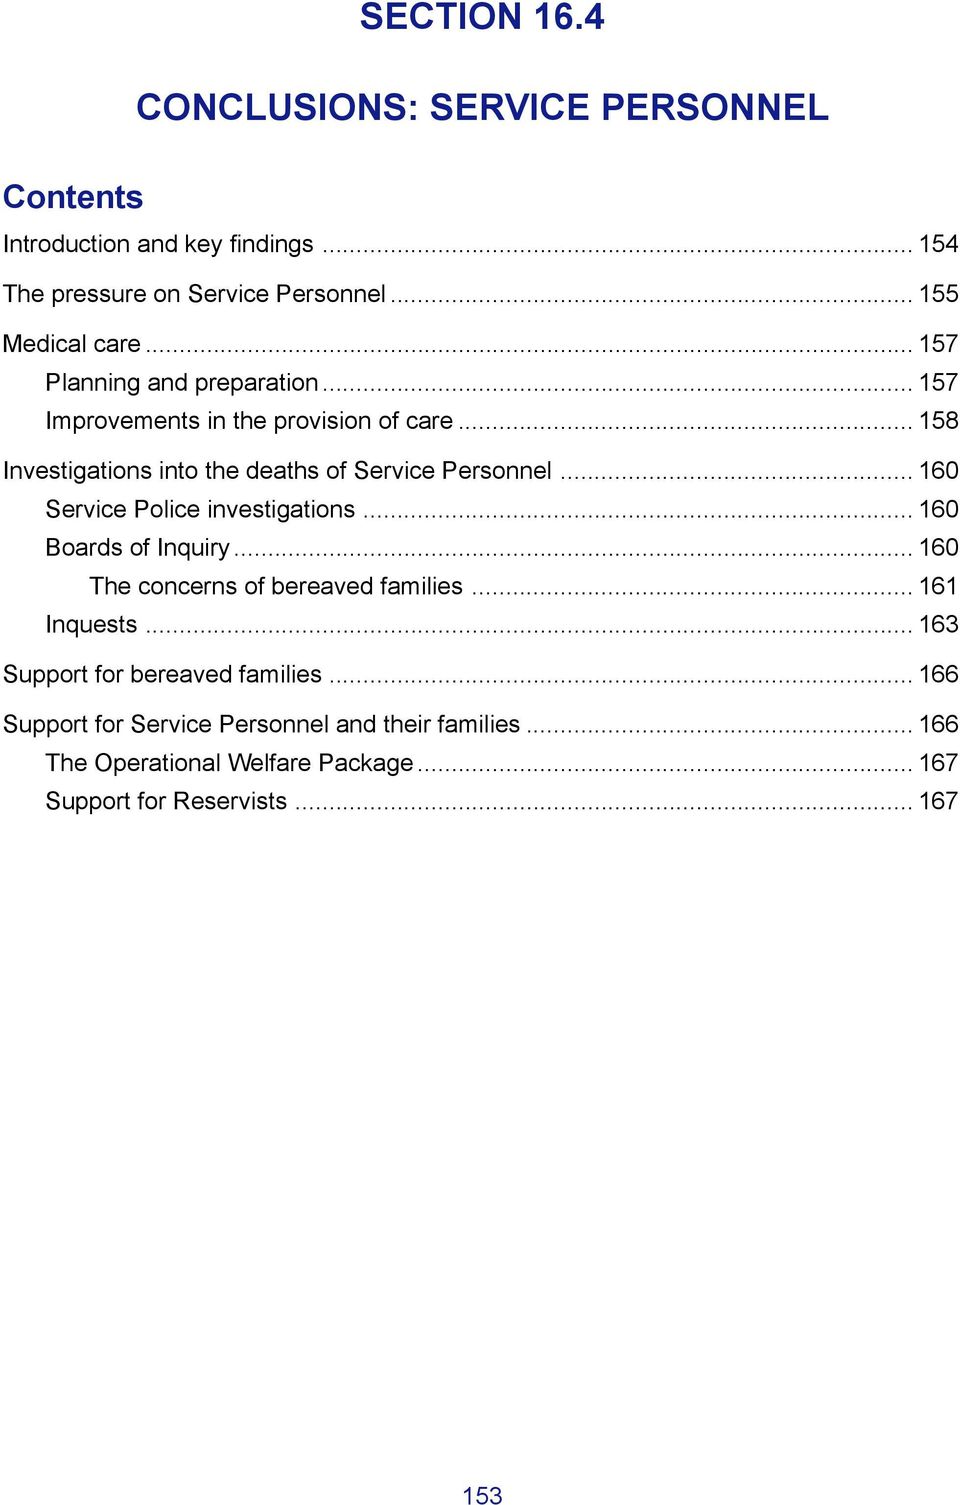 .. 160 Service Police investigations... 160 Boards of Inquiry... 160 The concerns of bereaved families... 161 Inquests.